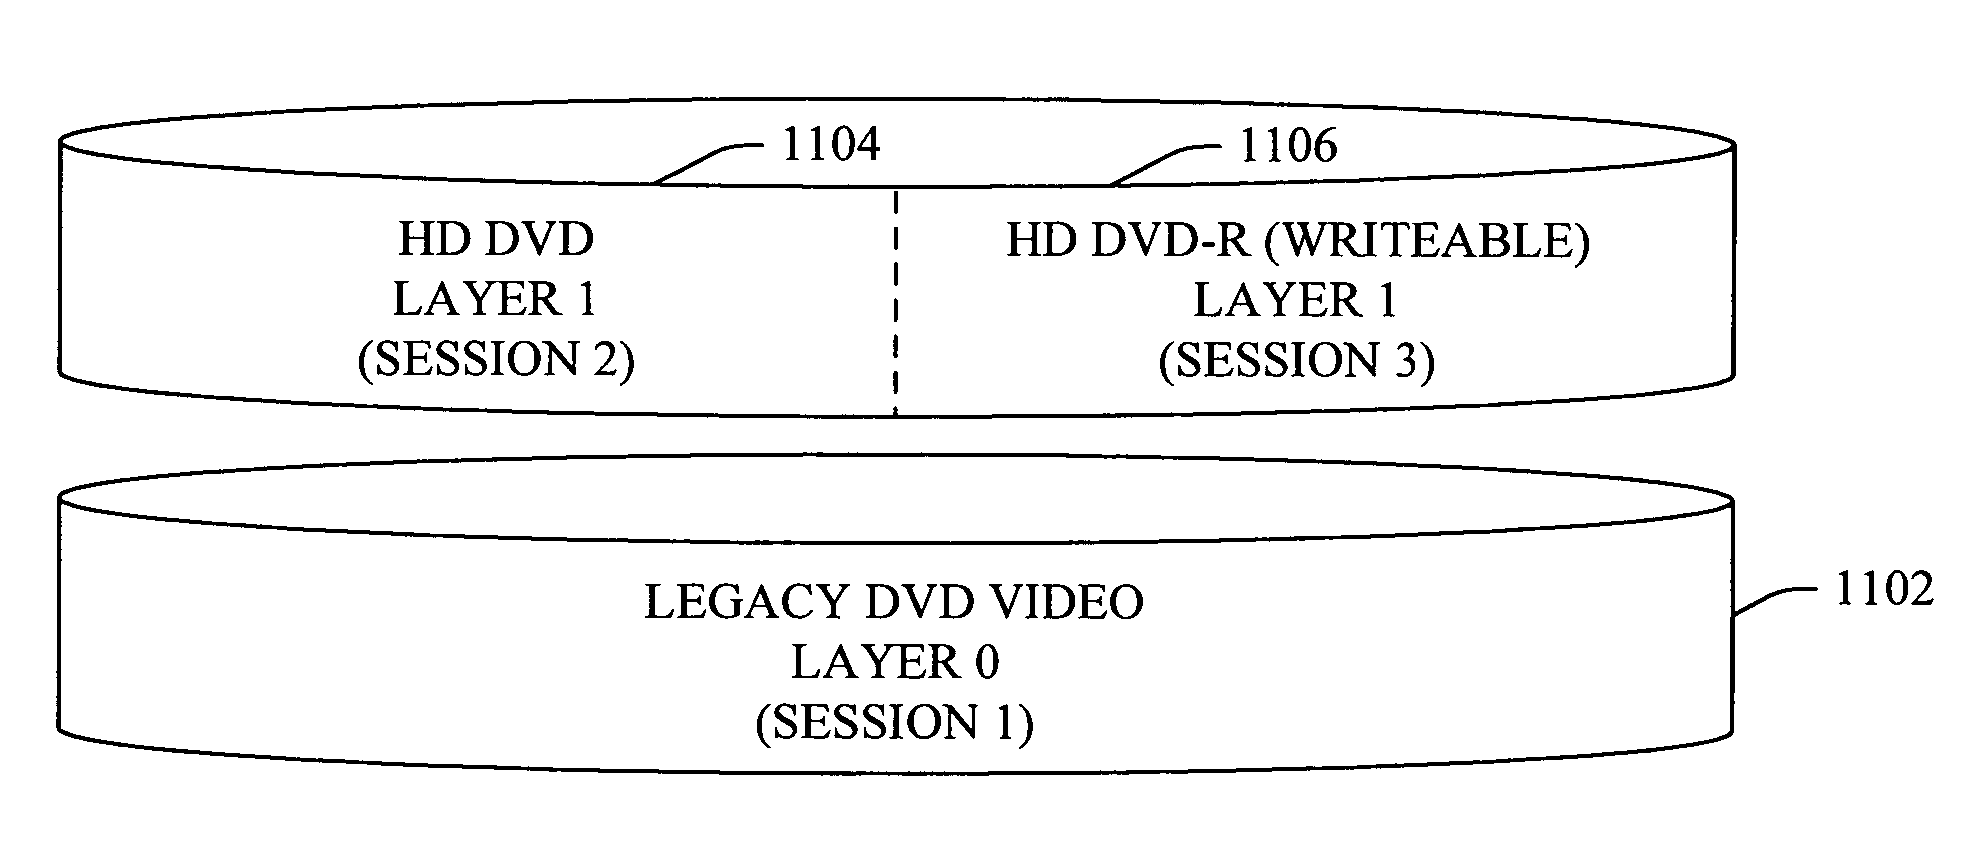 Multiple physical optical disc formats in backwards compatible order